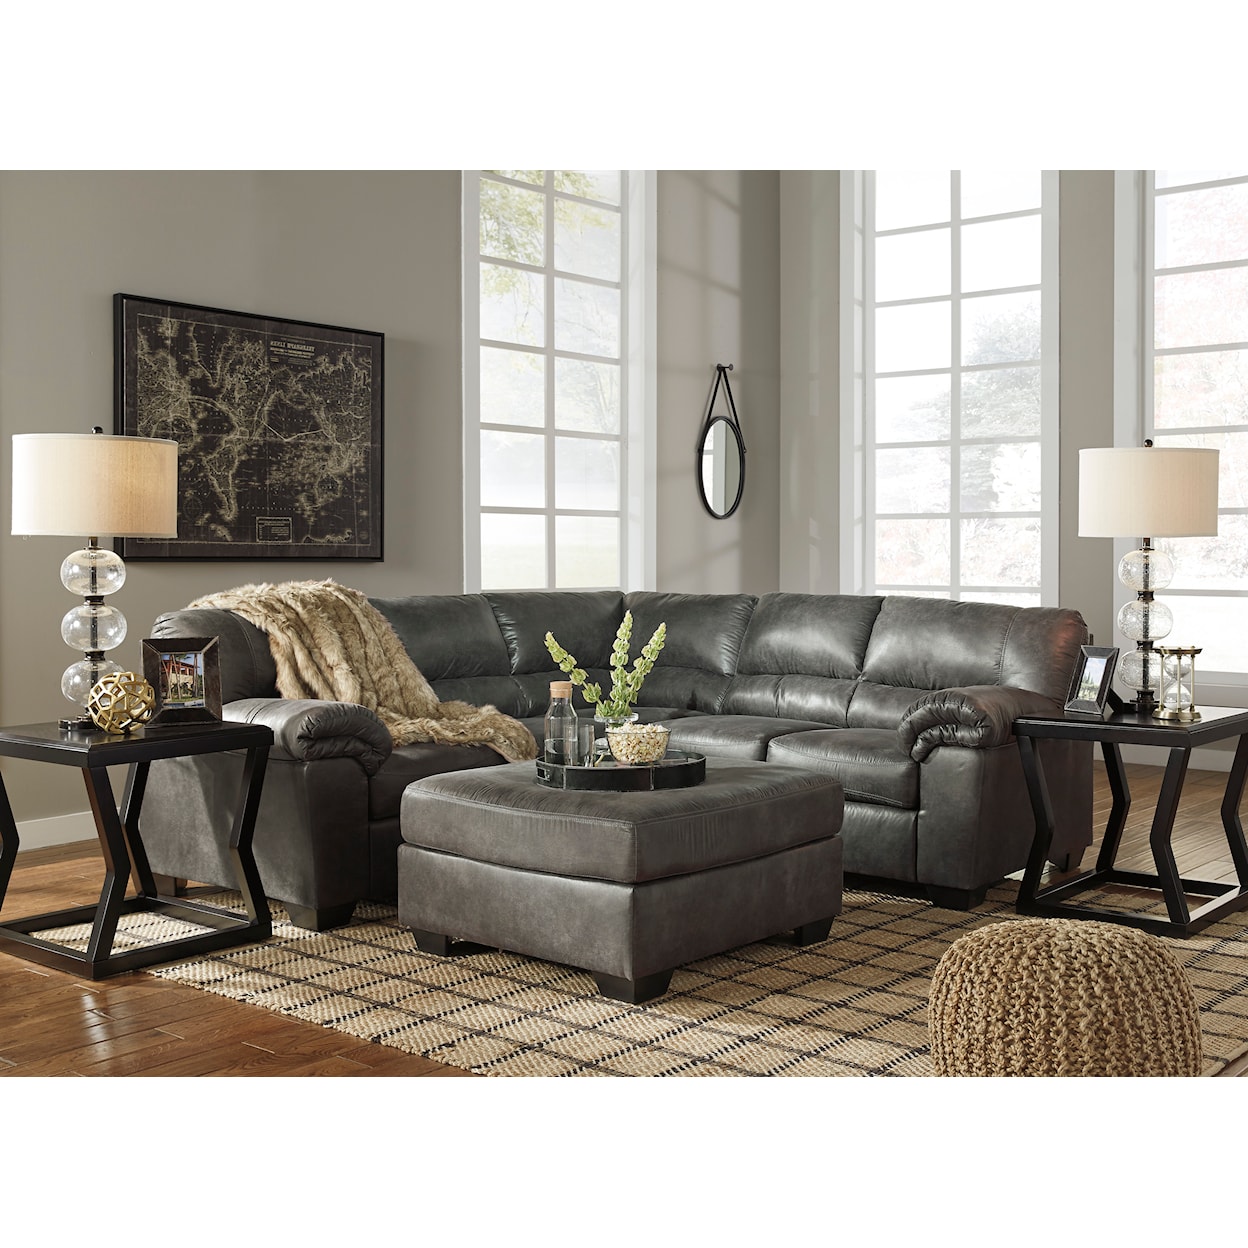 Ashley Furniture Signature Design Bladen 2-Piece Sectional with Ottoman